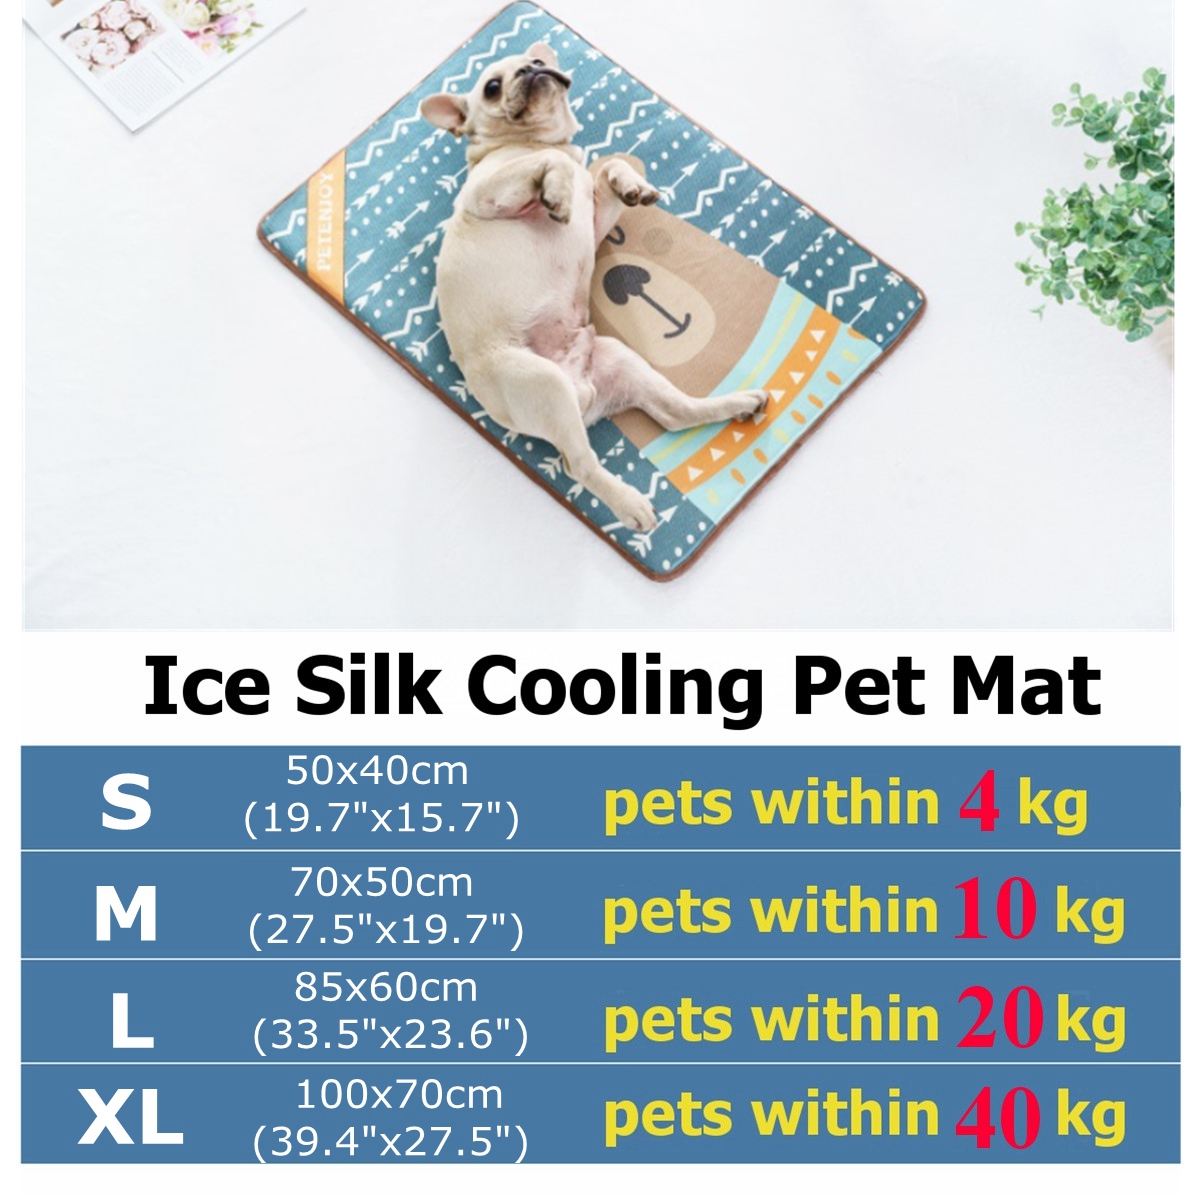 SMLXL-Ice-Silk-Summer-Cooling-Pet-Dog-Cat-Puppy-Cushion-Mat-Pad-Home-1550150-7